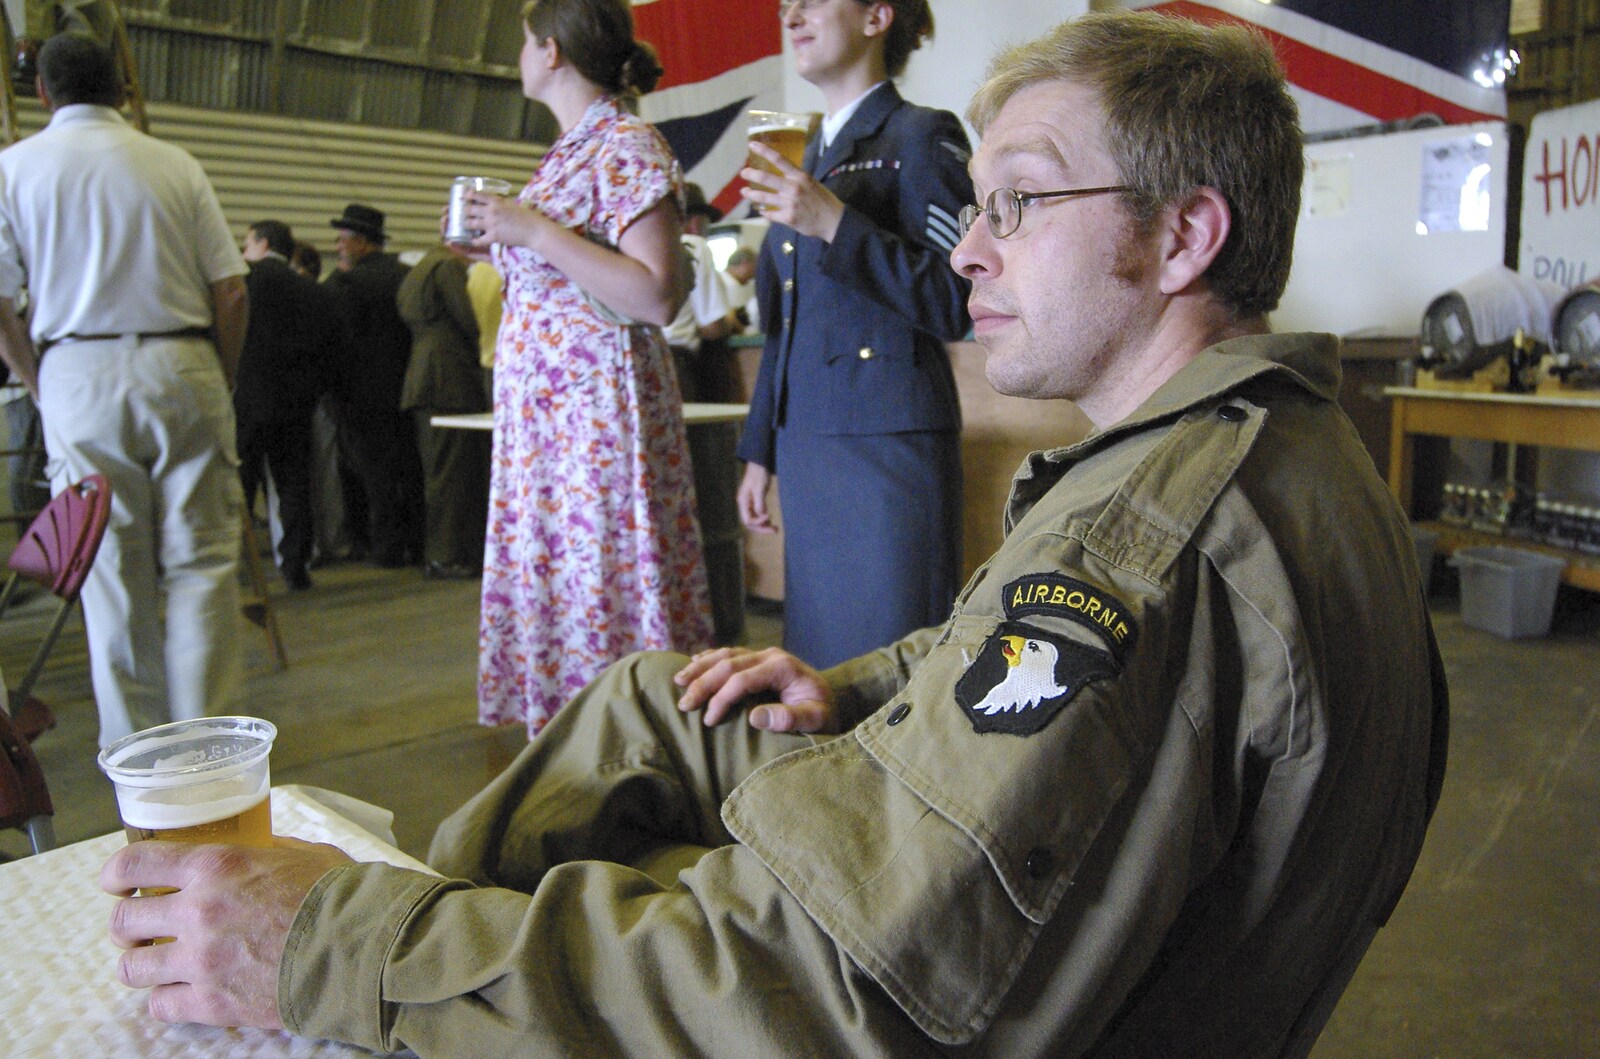 A 1940s Airfield Hangar Dance, Debach, Suffolk - 9th June 2007: Marc looks on, with beer in hand